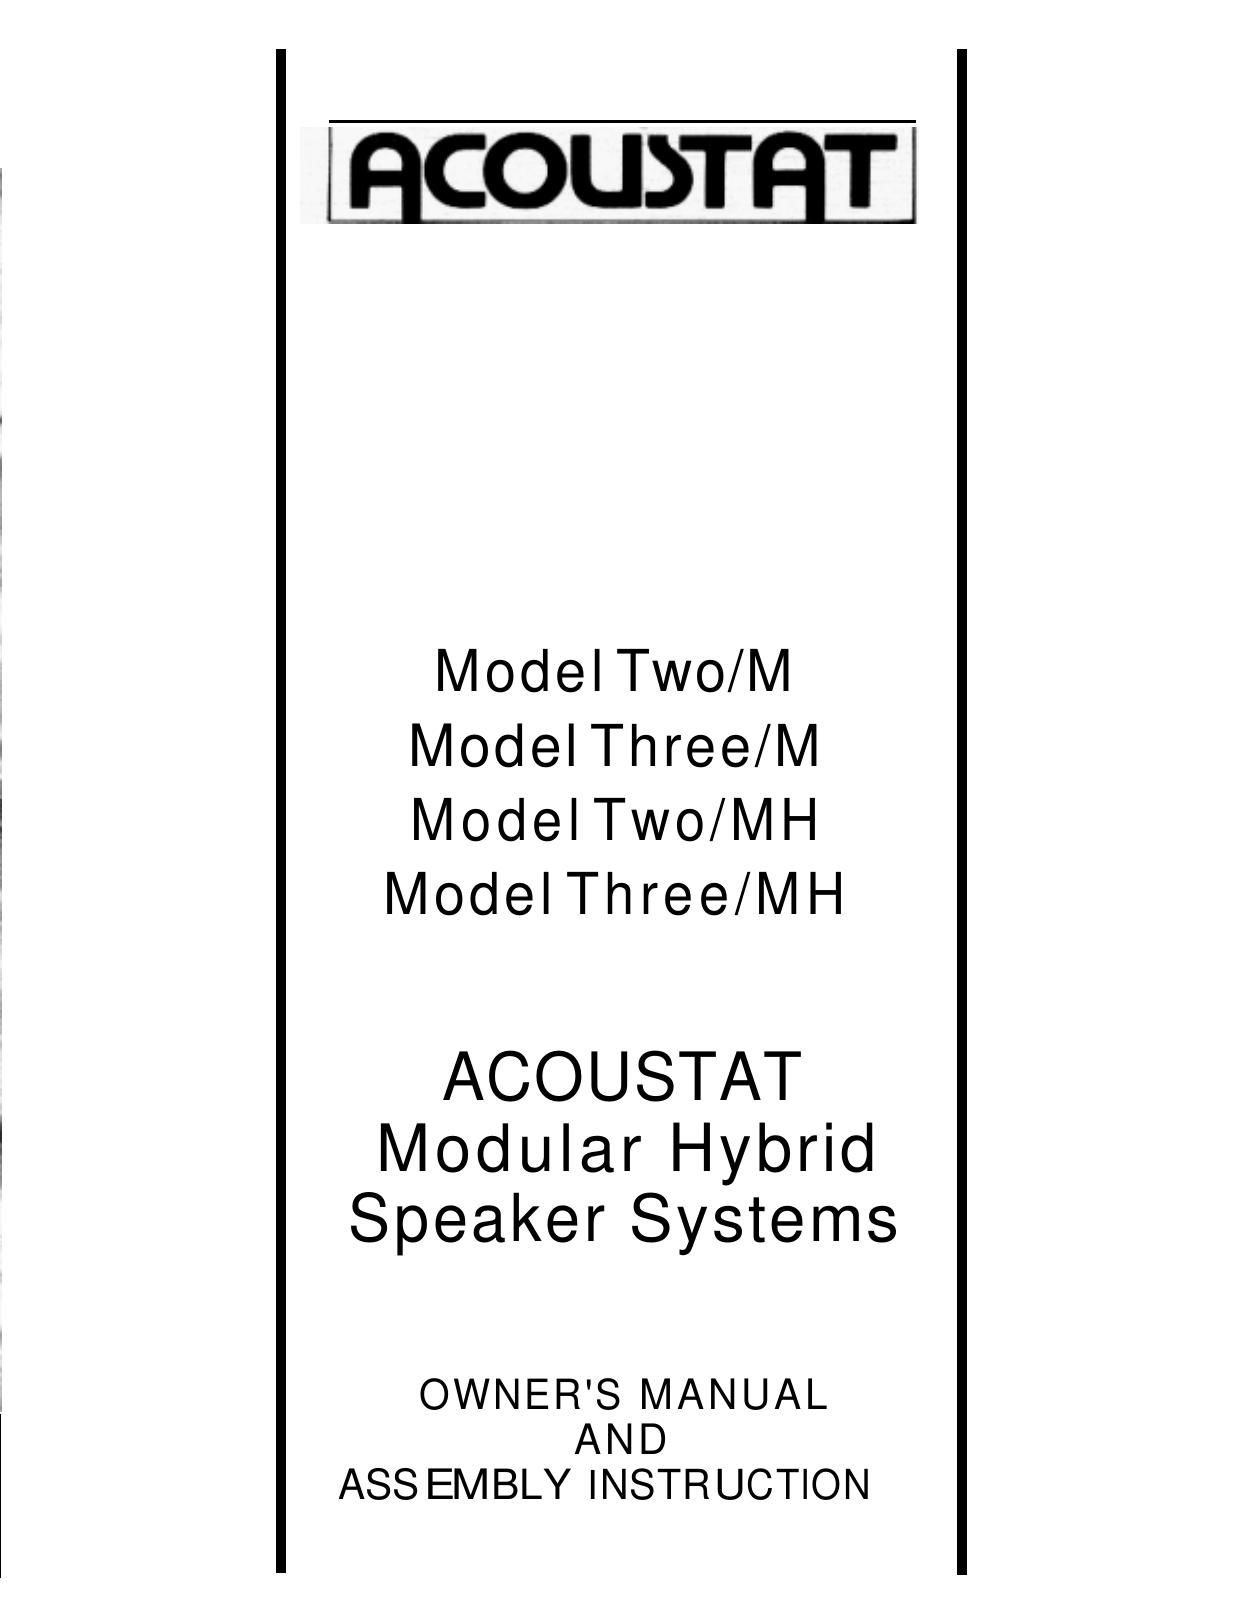 Acoustat Model 3 MH Owners Manual